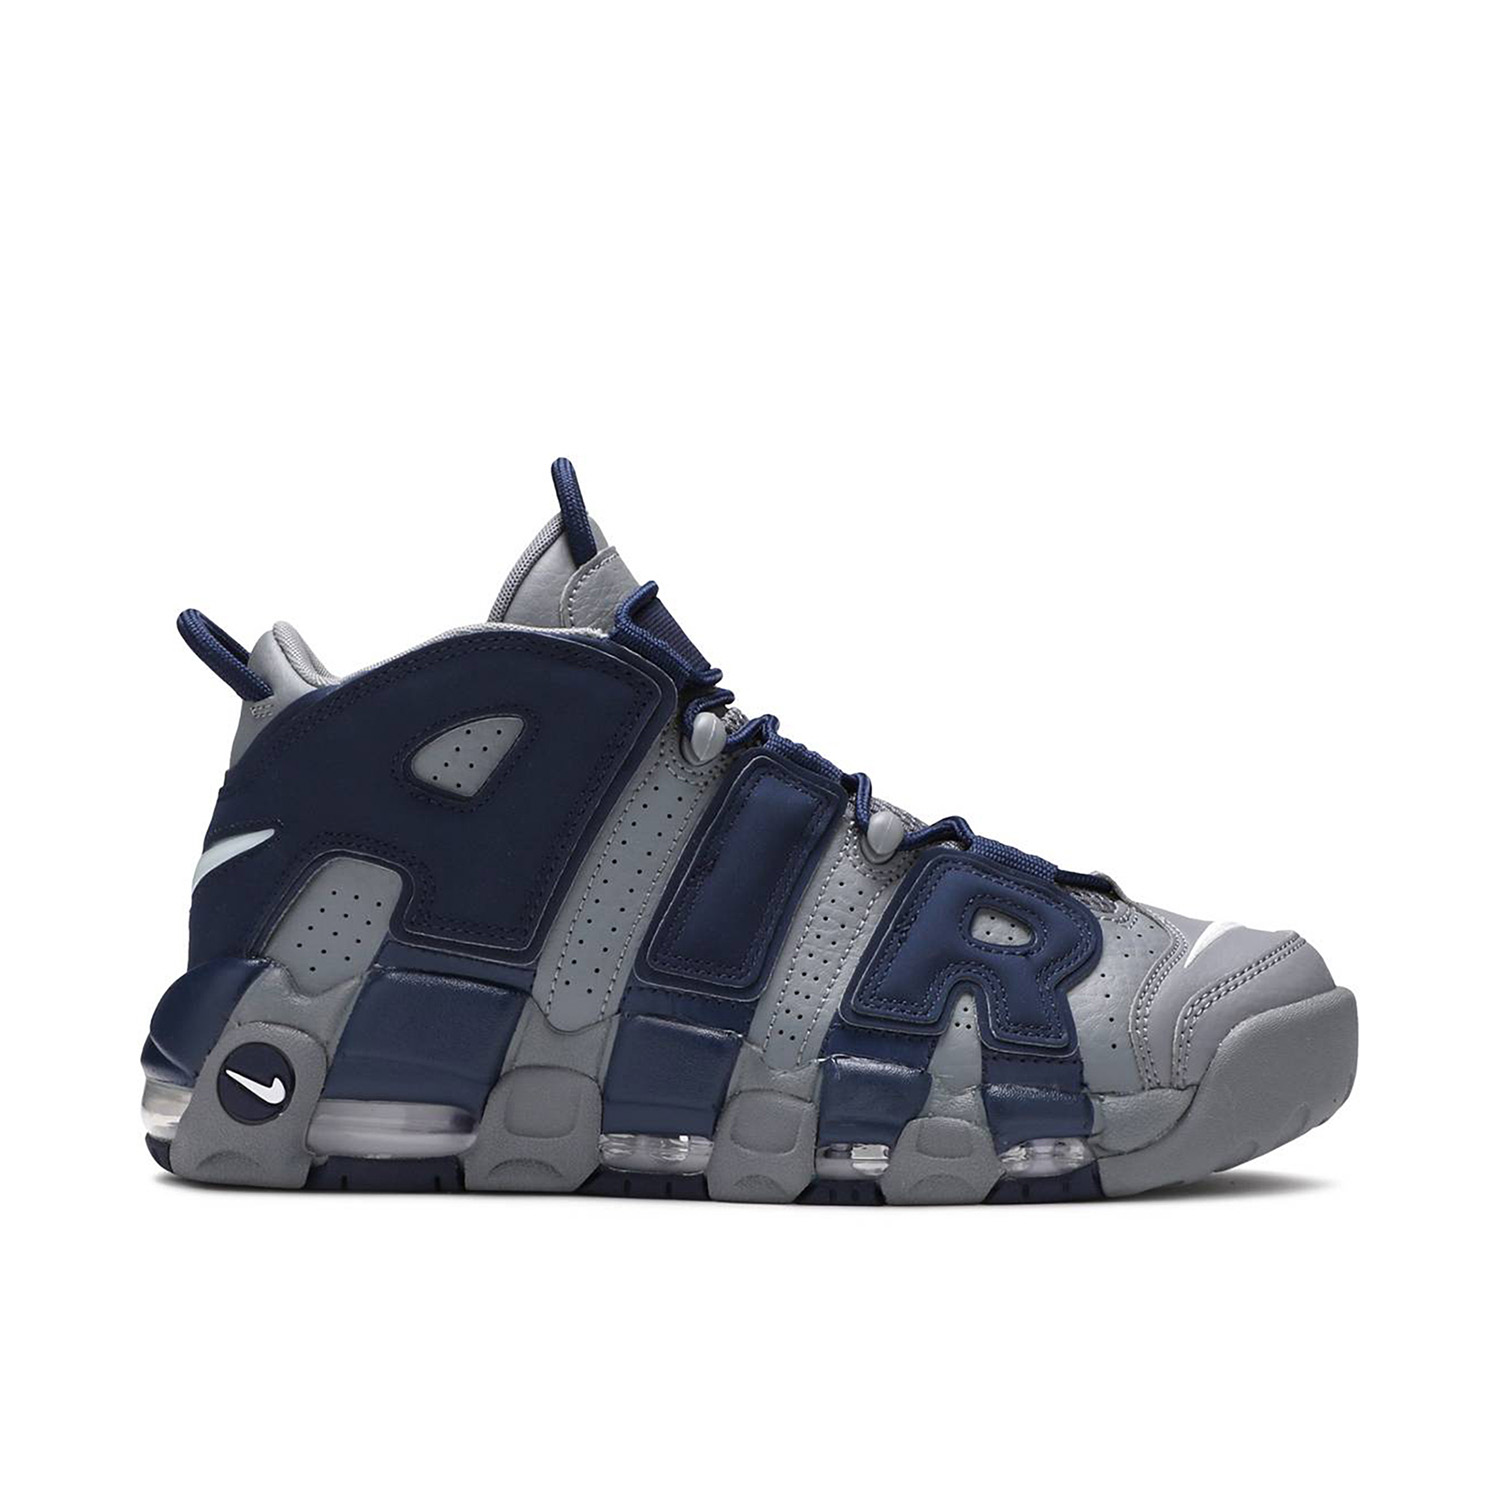 nike air max bayan boyner shoes sale today online - 003 | Nike Air More Uptempo Georgetown | Cheap Ietp outlet | 921948